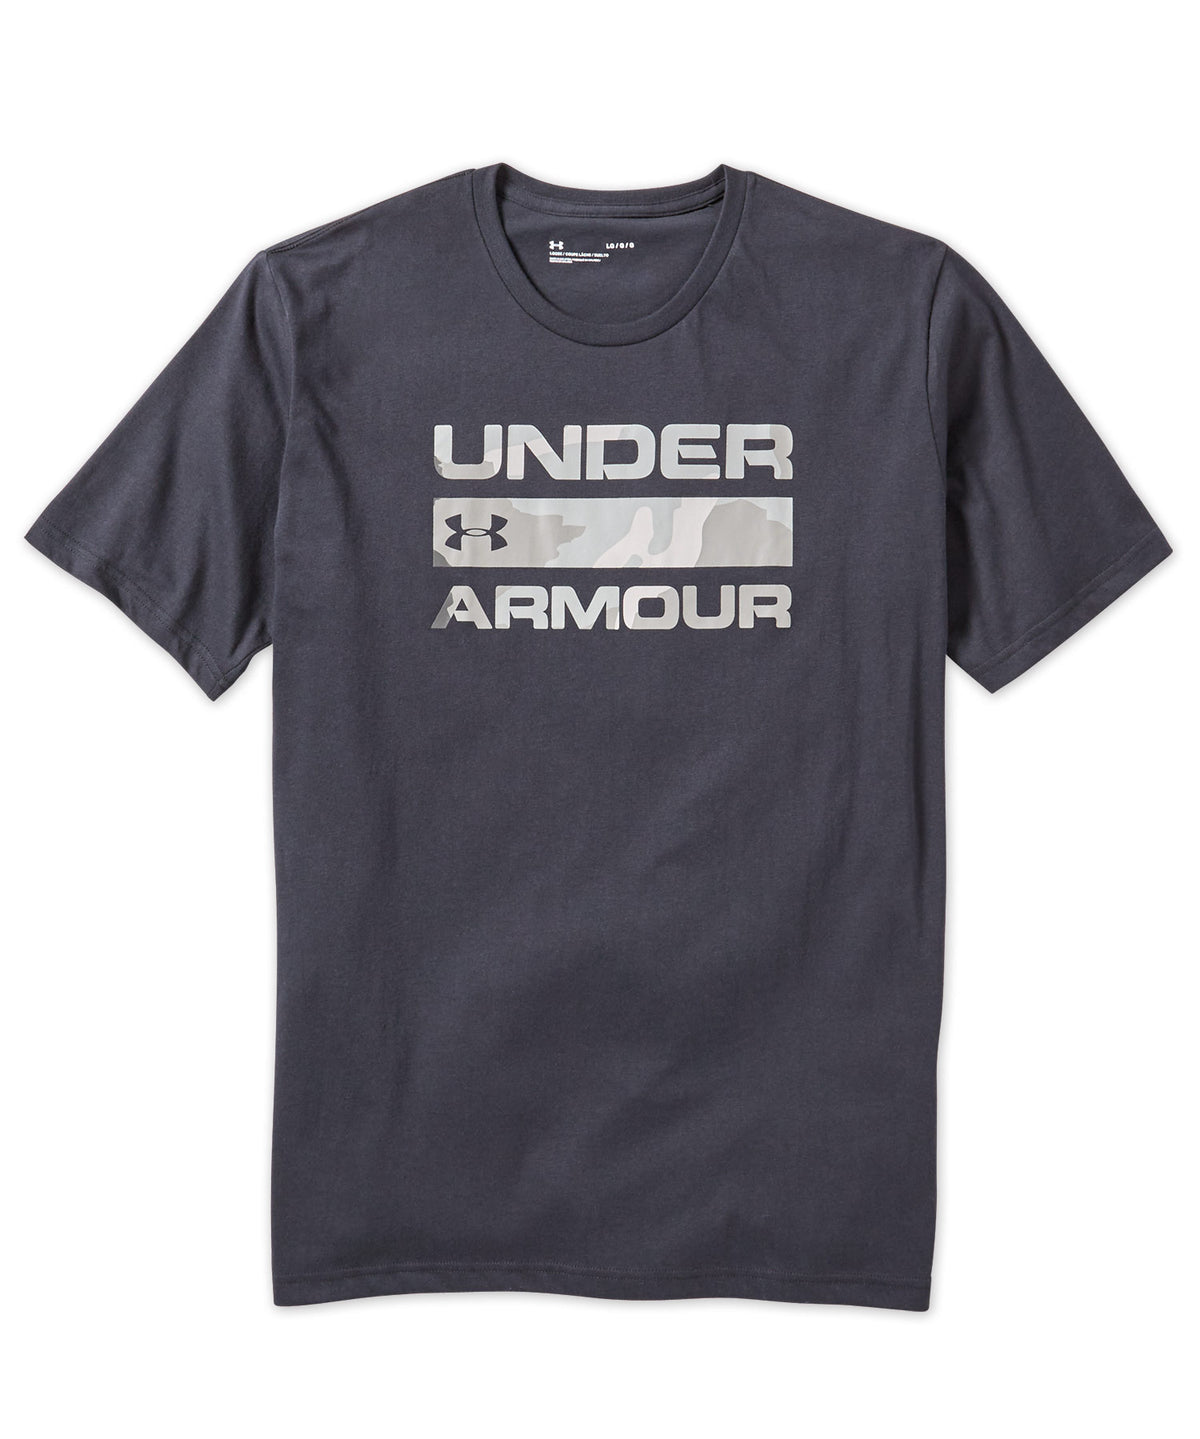 Under Armour Sportstyle Short-Sleeve Graphic Print Tee, Big & Tall